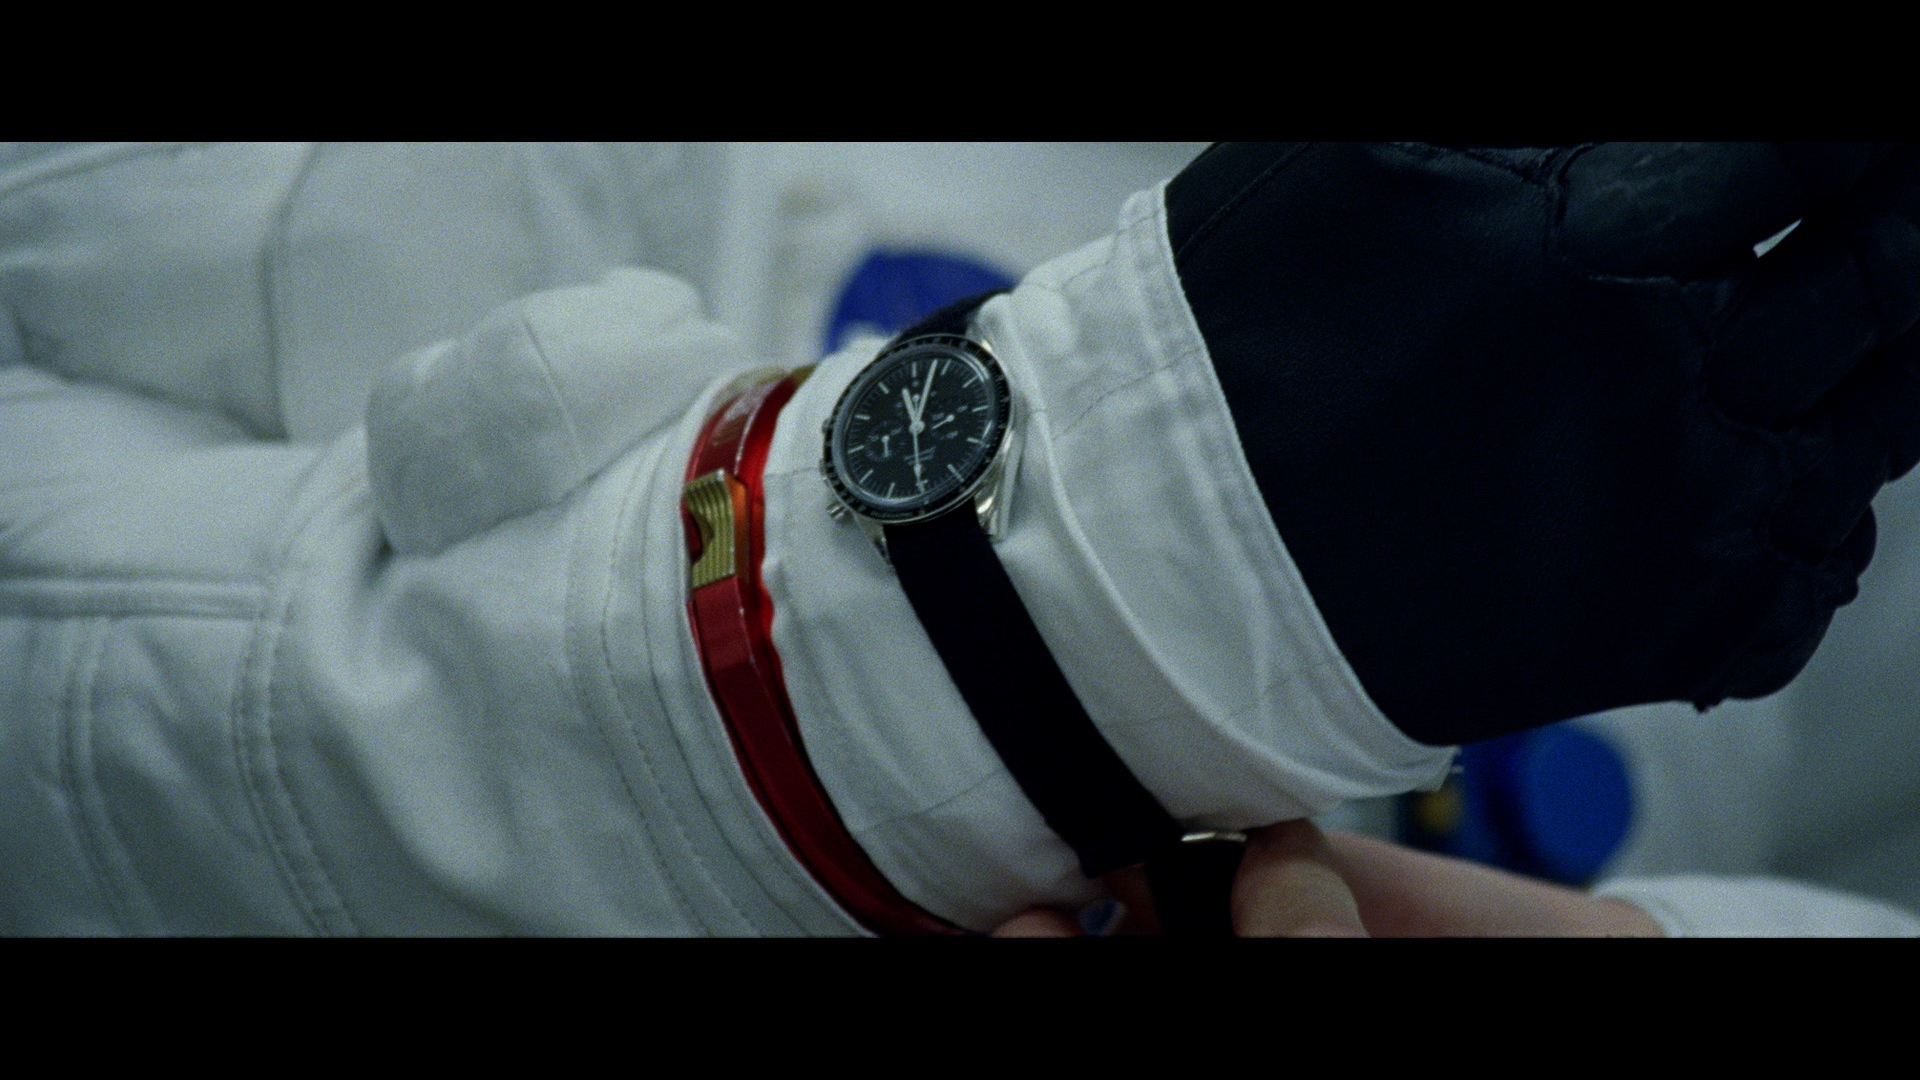 From the movie "First Man"... a Speedmaster on the wrist of an astronaut ...